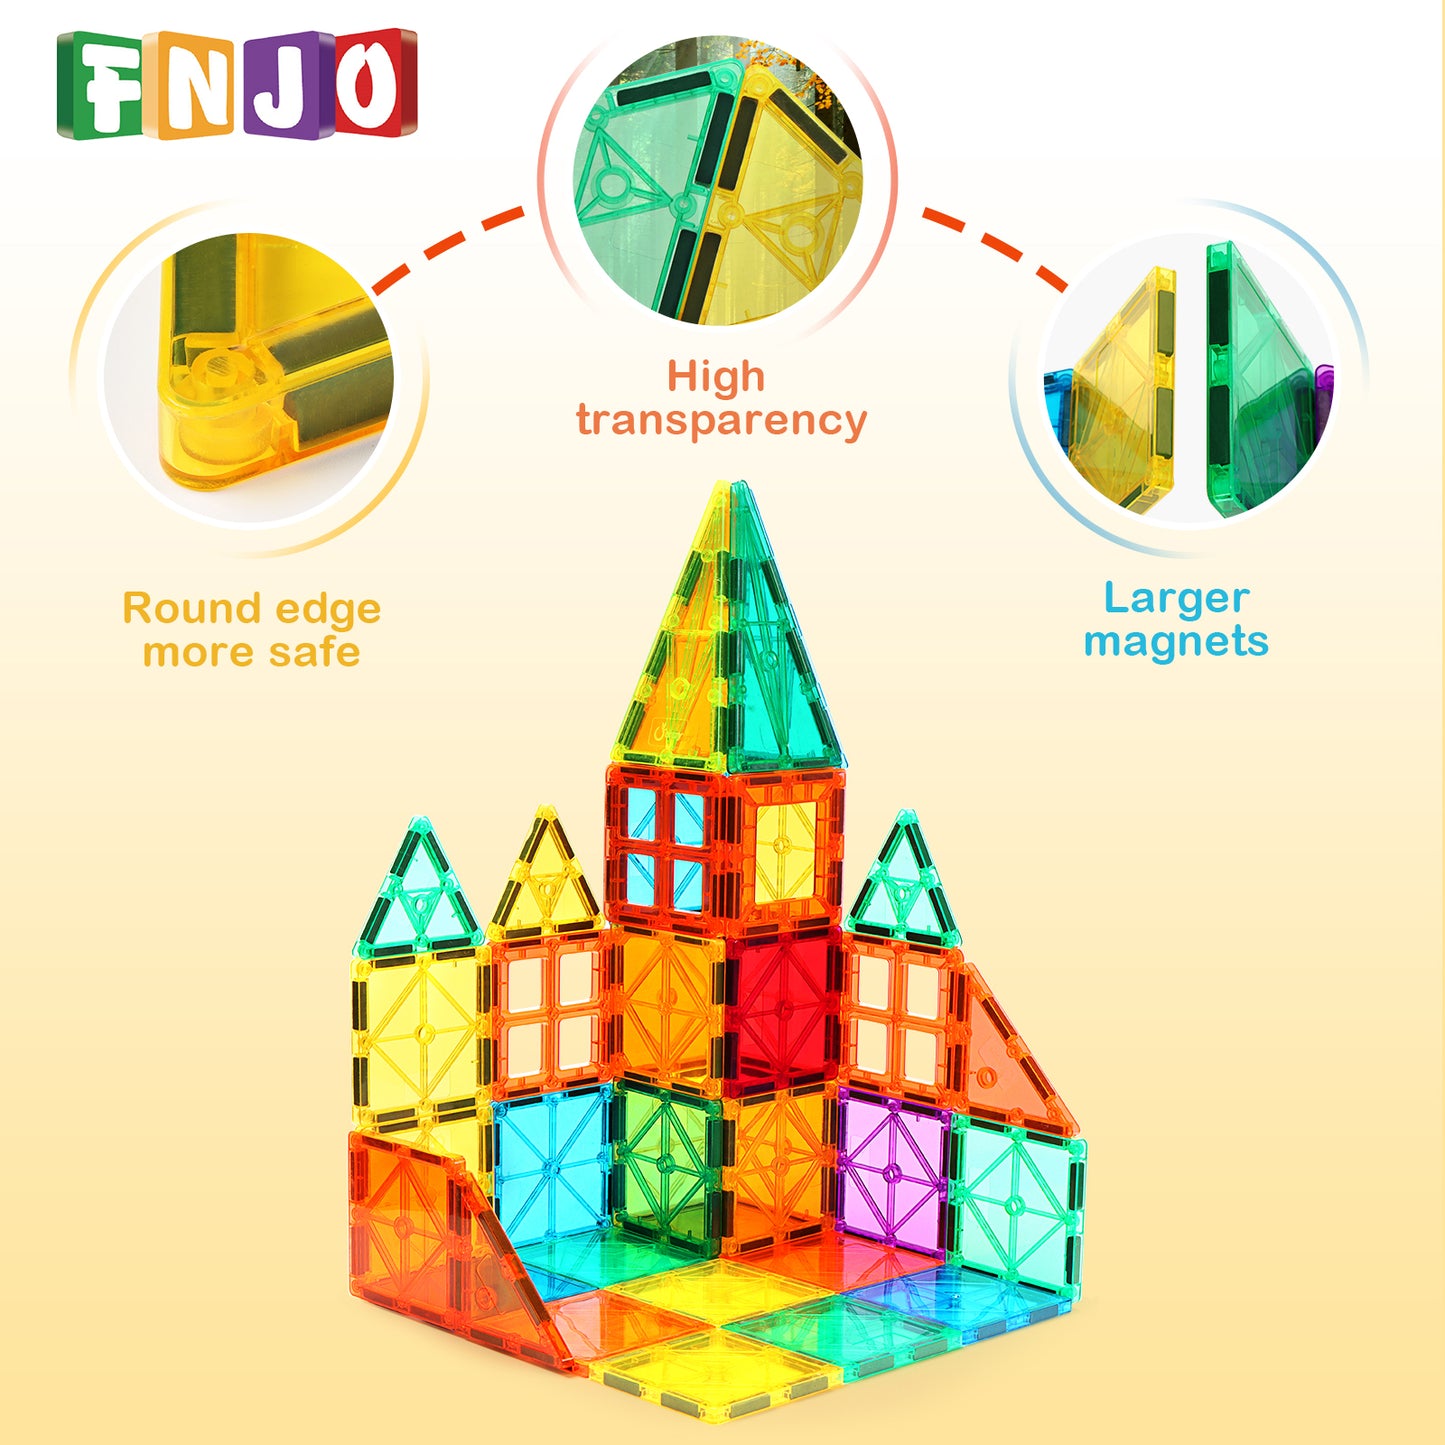 FNJO Magnetic Tiles, 100PCS Building Blocks, Magnets Building Set, STEM Toys Christmas Toy Gift for Kids Boys and Girls